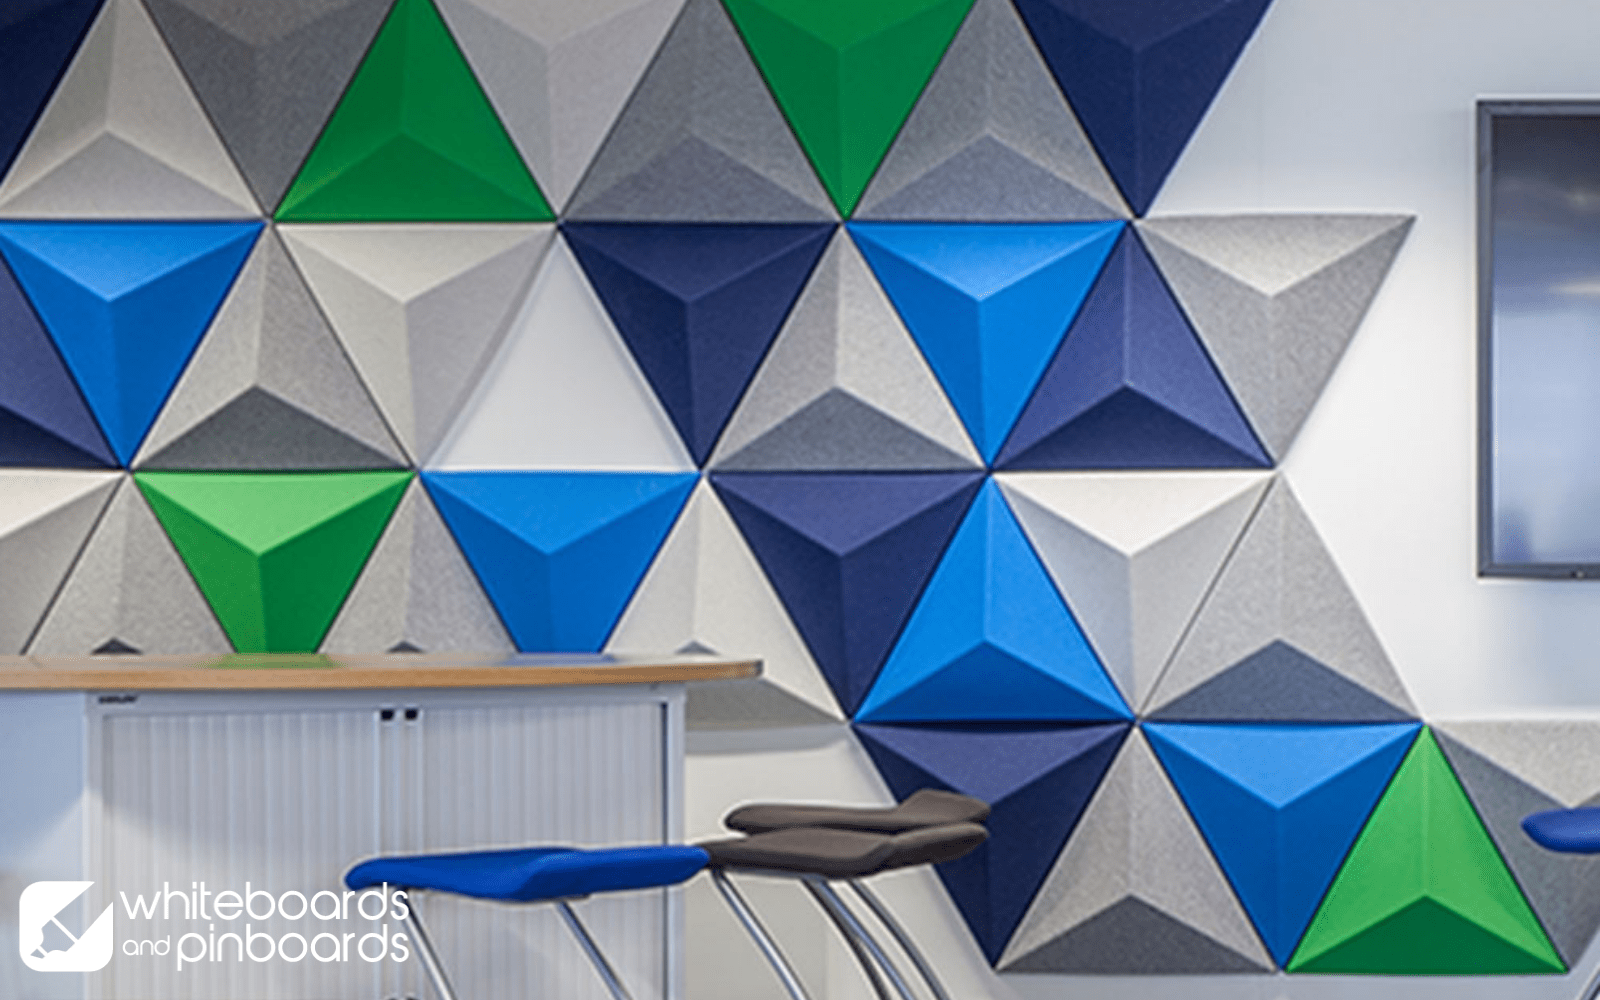 5 Tips for Where to Place Acoustic Panels in Rooms